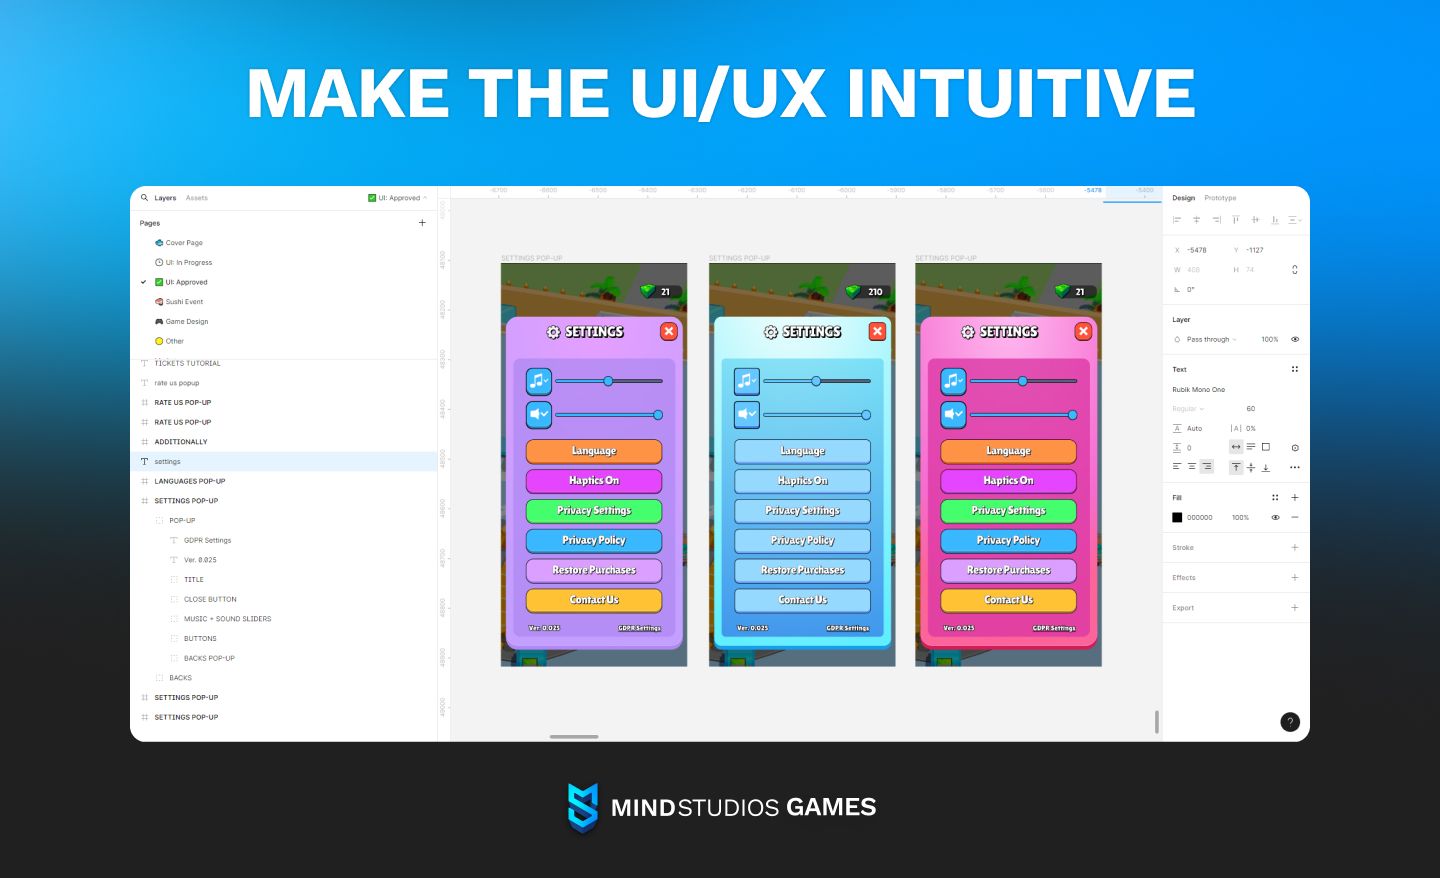 Make the UI/UX intuitive